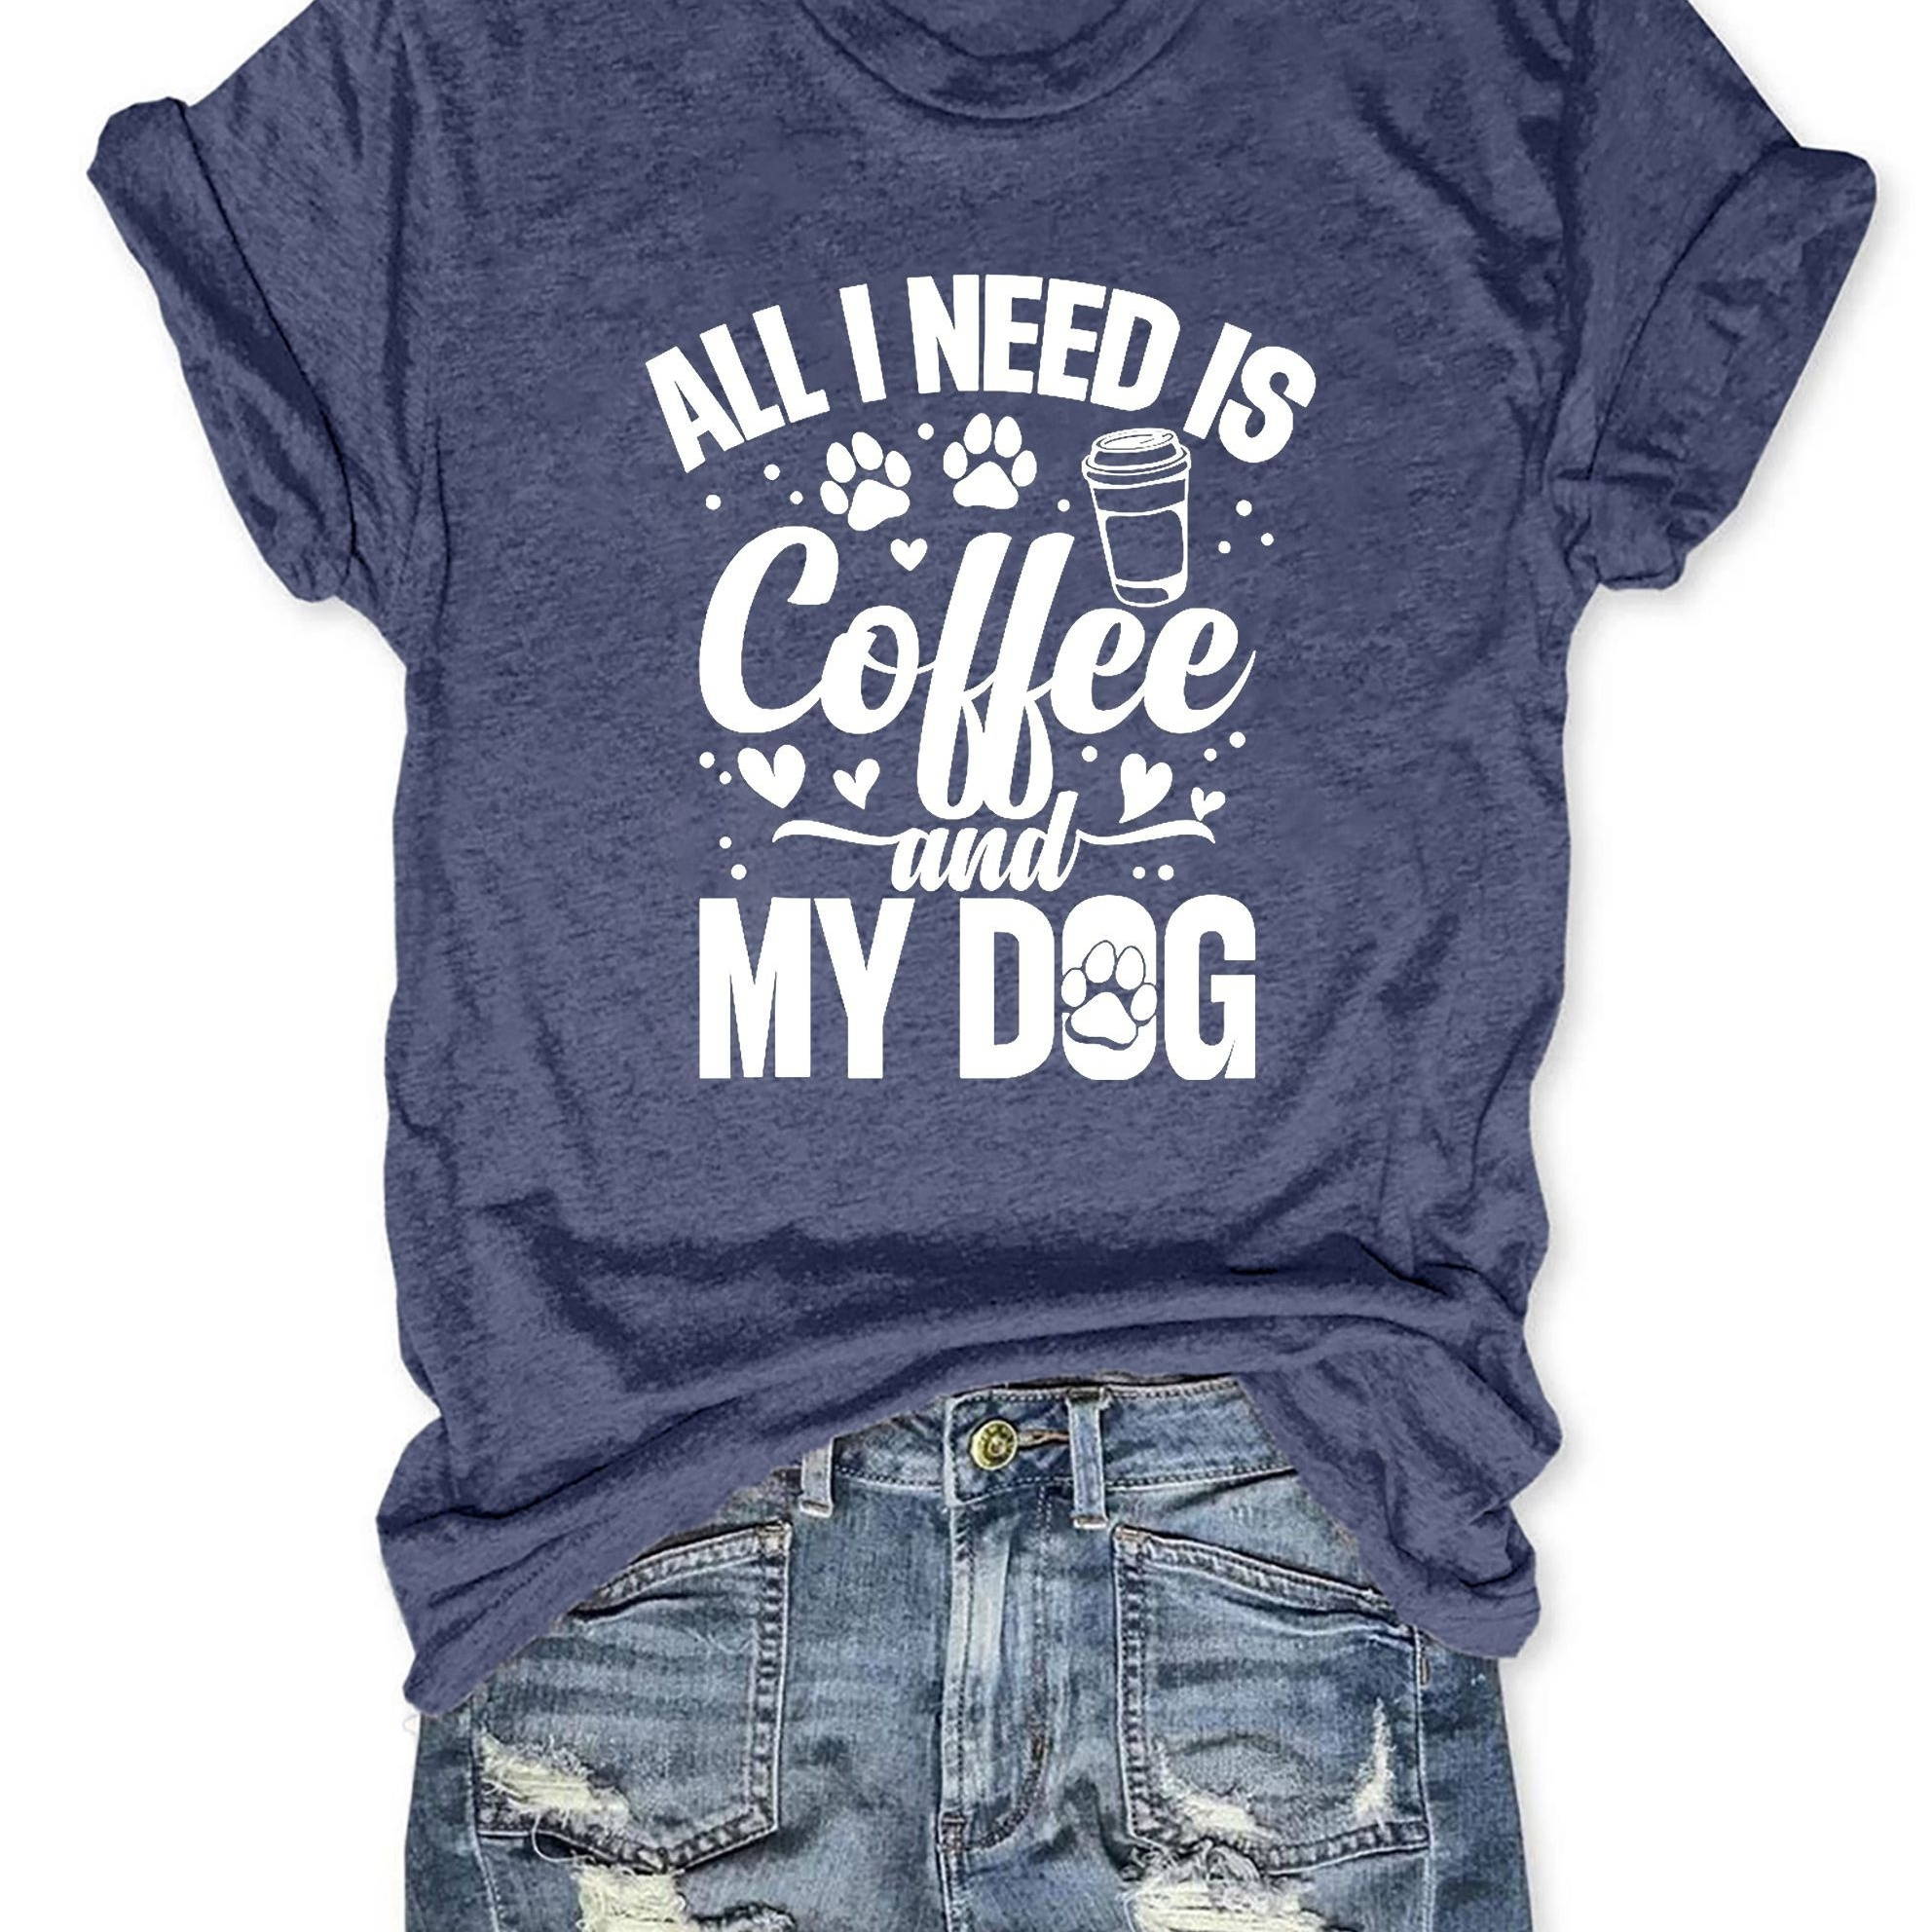 

Coffee & Dog Print T-shirt, Short Sleeve Crew Neck Casual Top For Summer & Spring, Women's Clothing